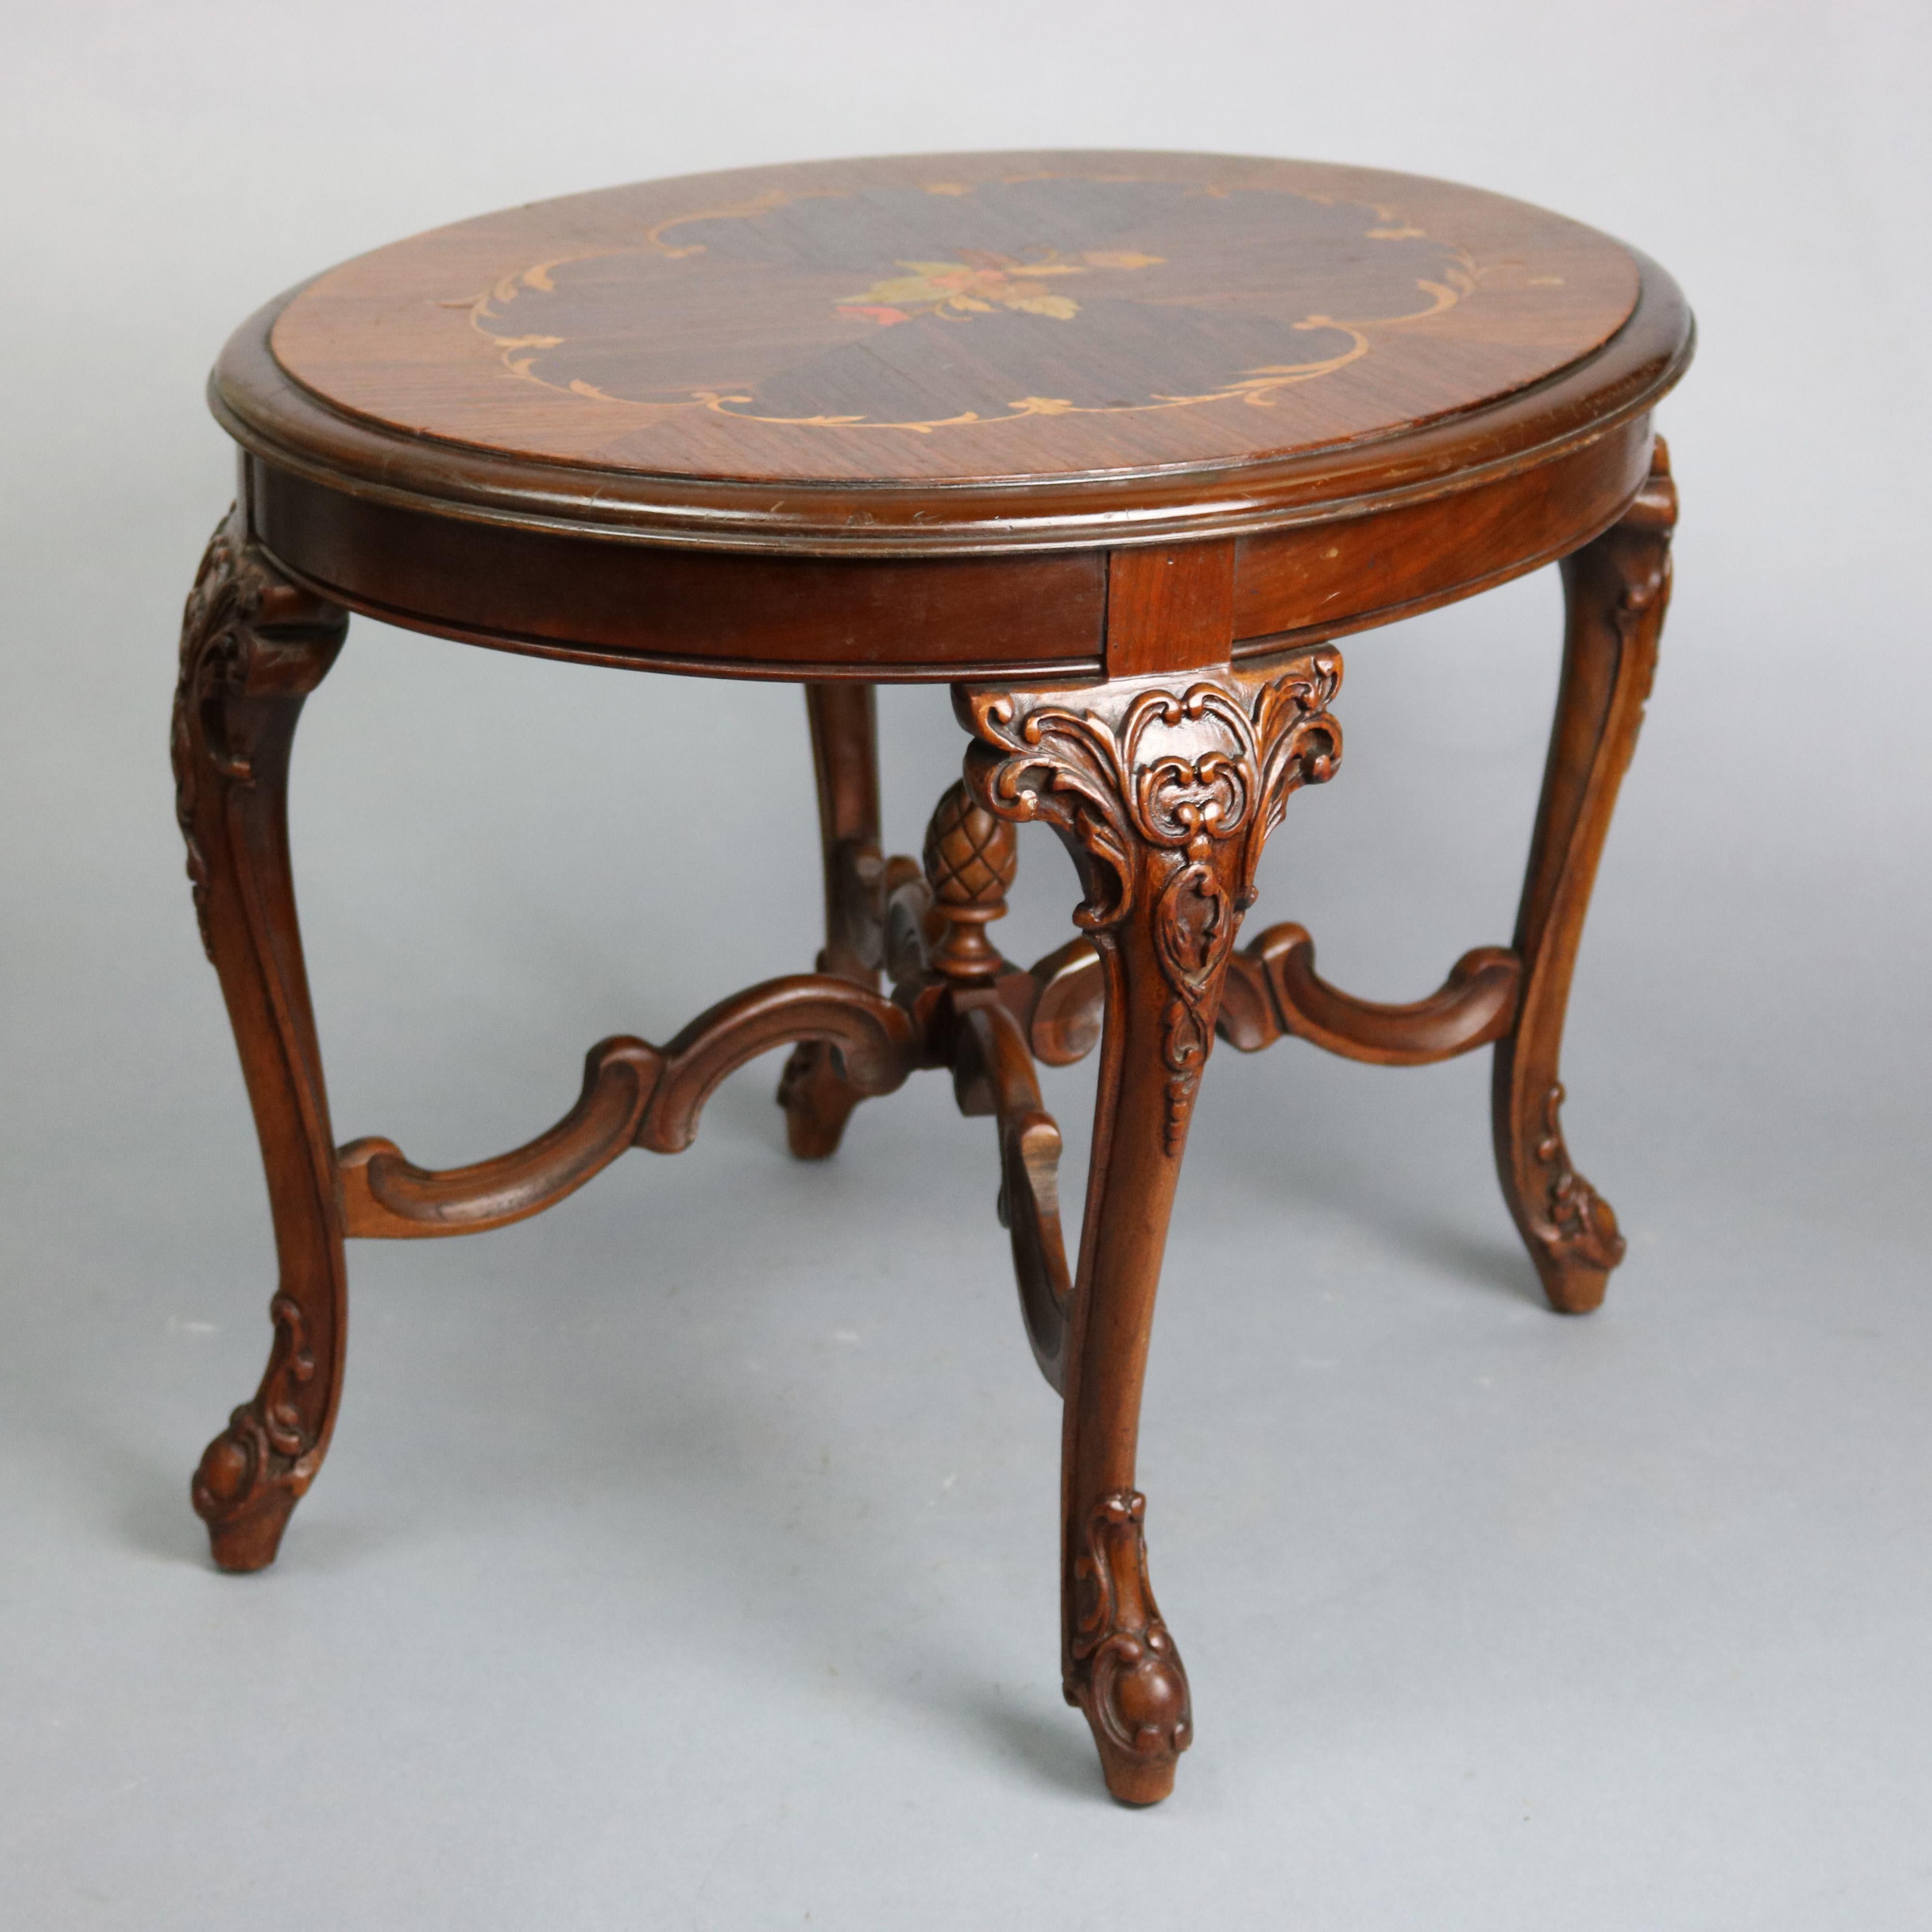 An antique French style side table offers mahogany construction with kingwood inlaid foliate marquetry top surmounting mahogany base having foliate carved cabriole legs with scroll form cross stretcher and central finial, circa 1920

Measures: 18